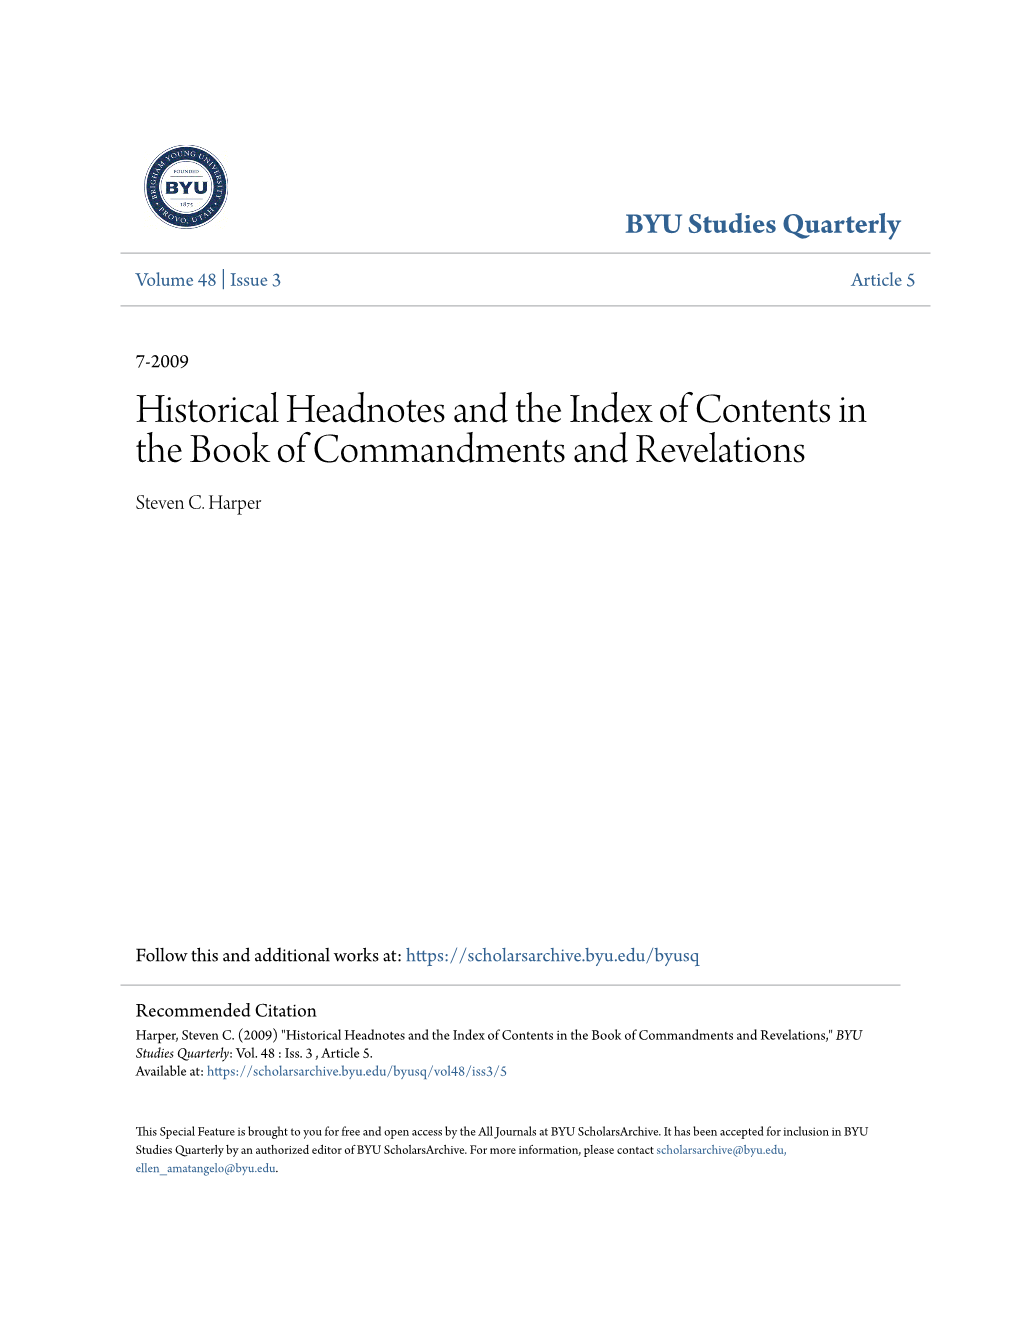 Historical Headnotes and the Index of Contents in the Book of Commandments and Revelations Steven C